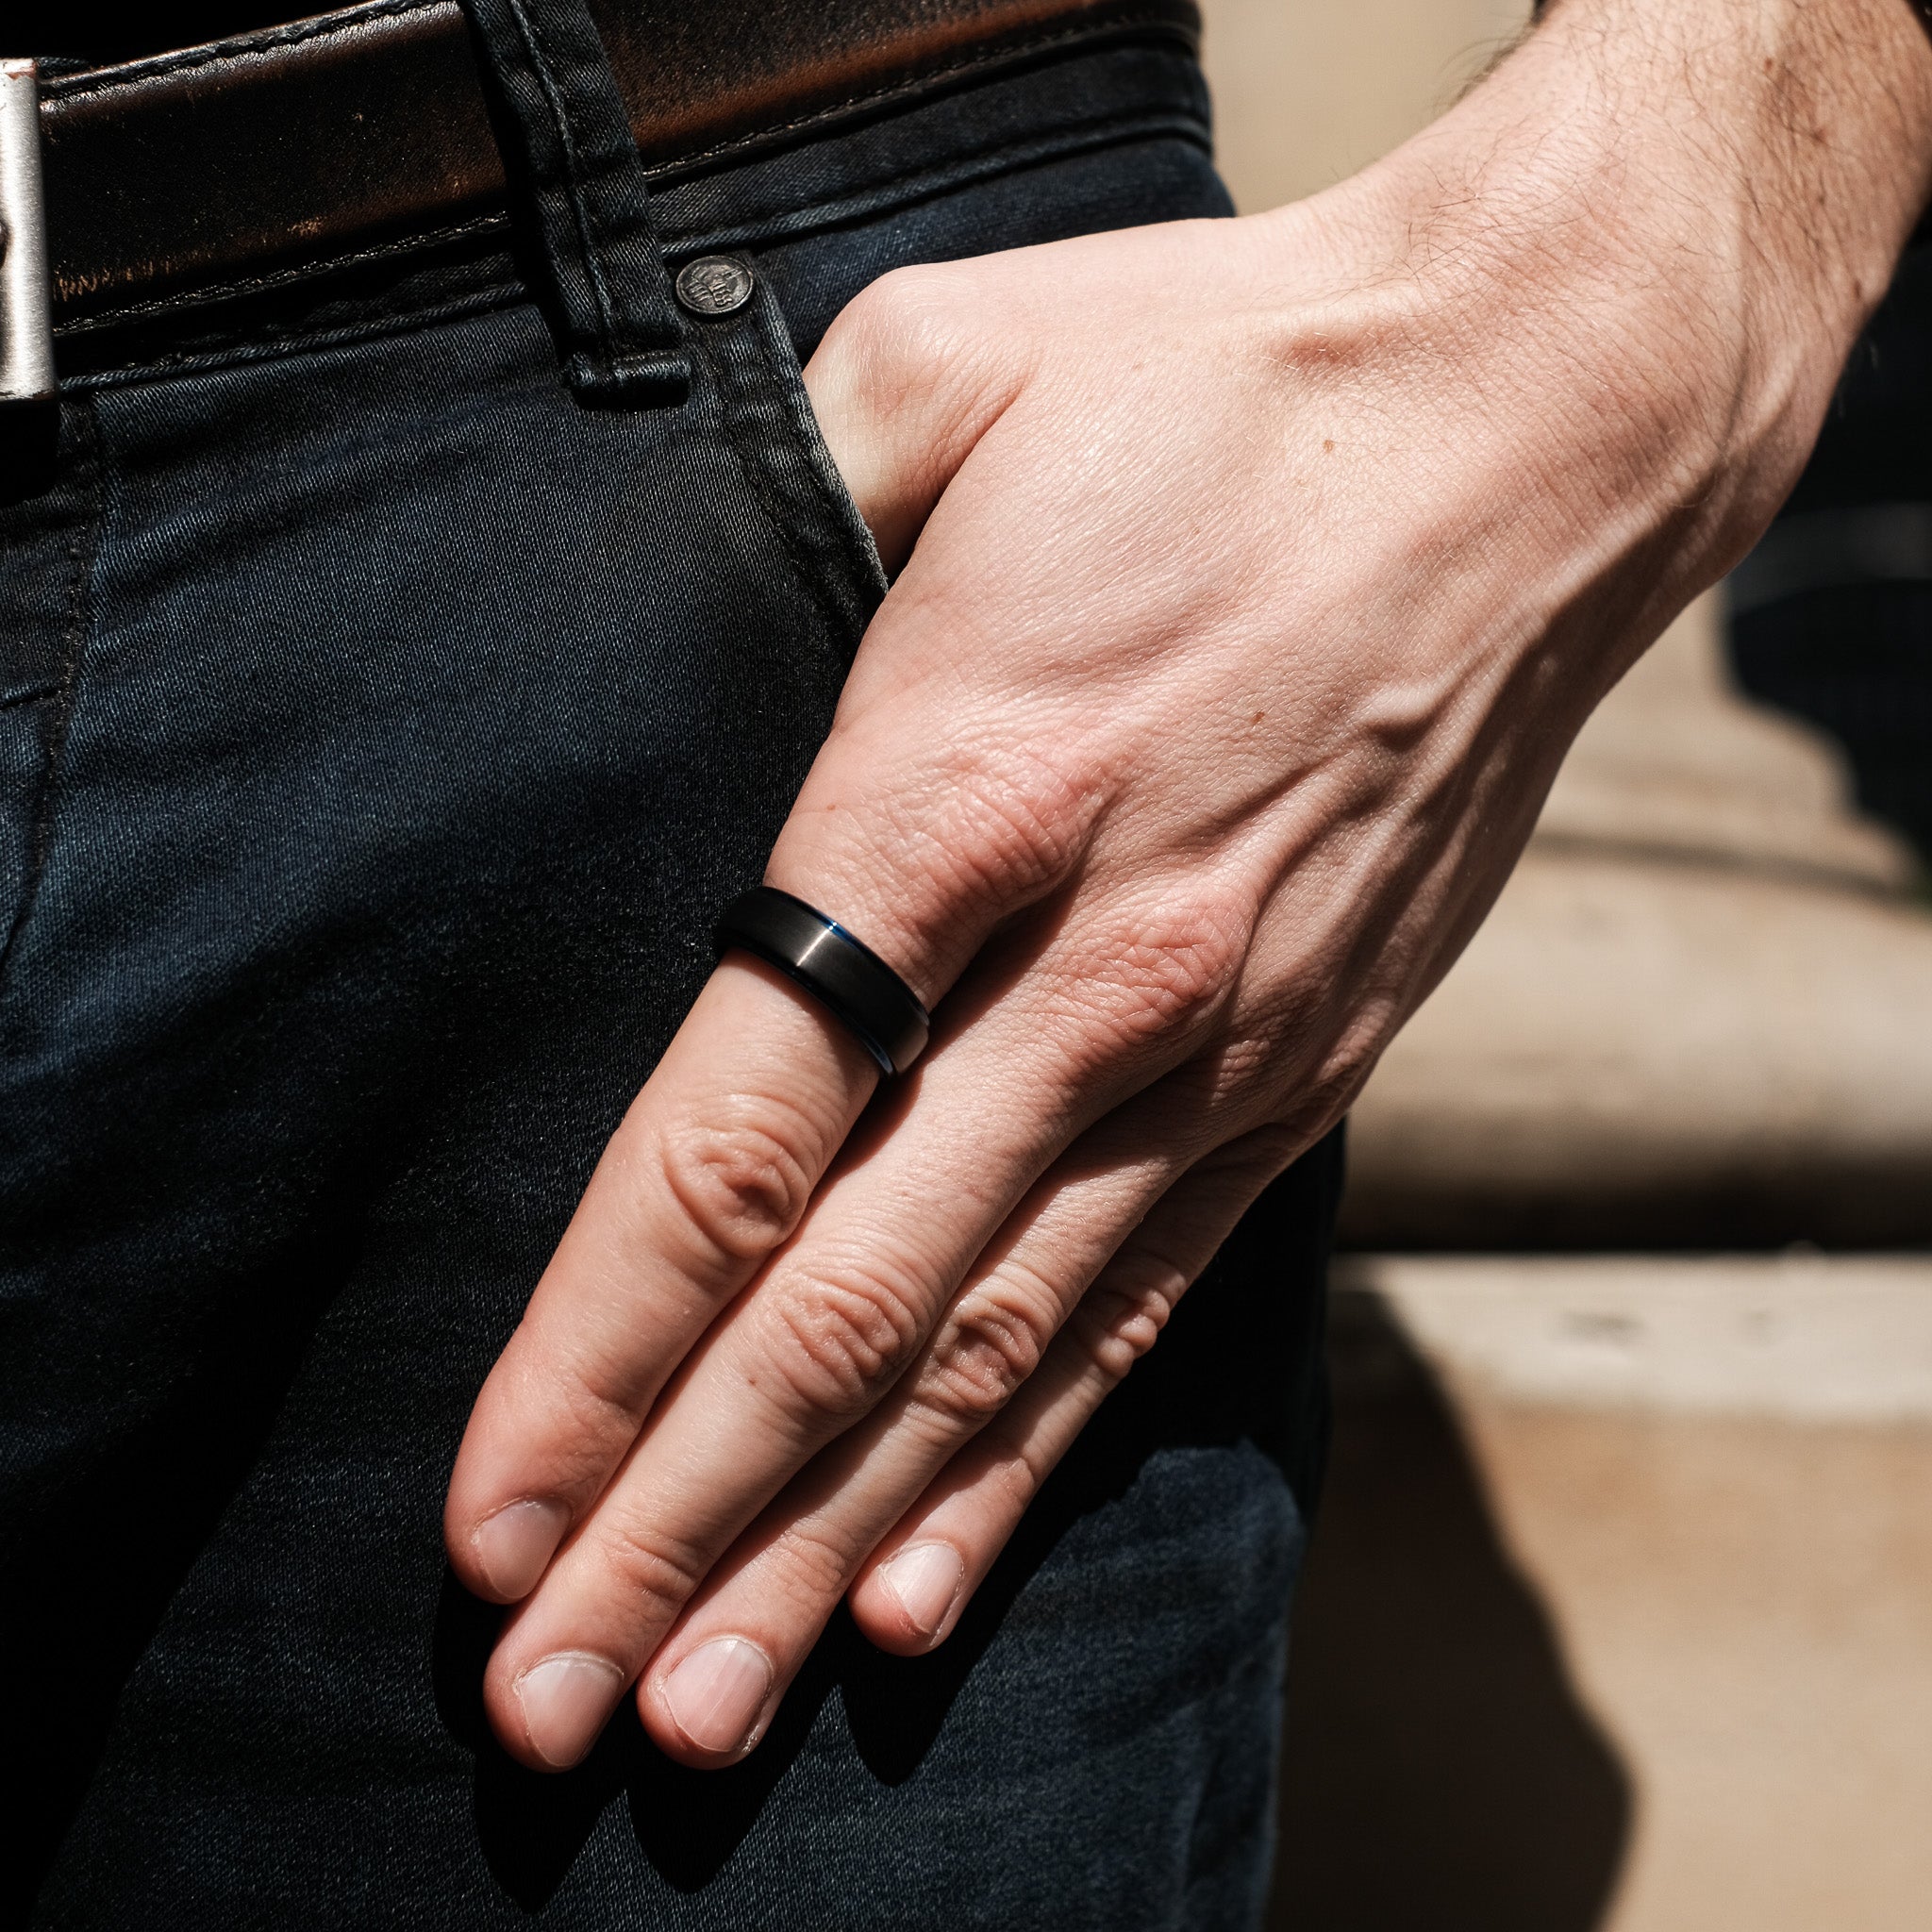 The Urban - Black Brushed Blue Edged Tungsten Ring